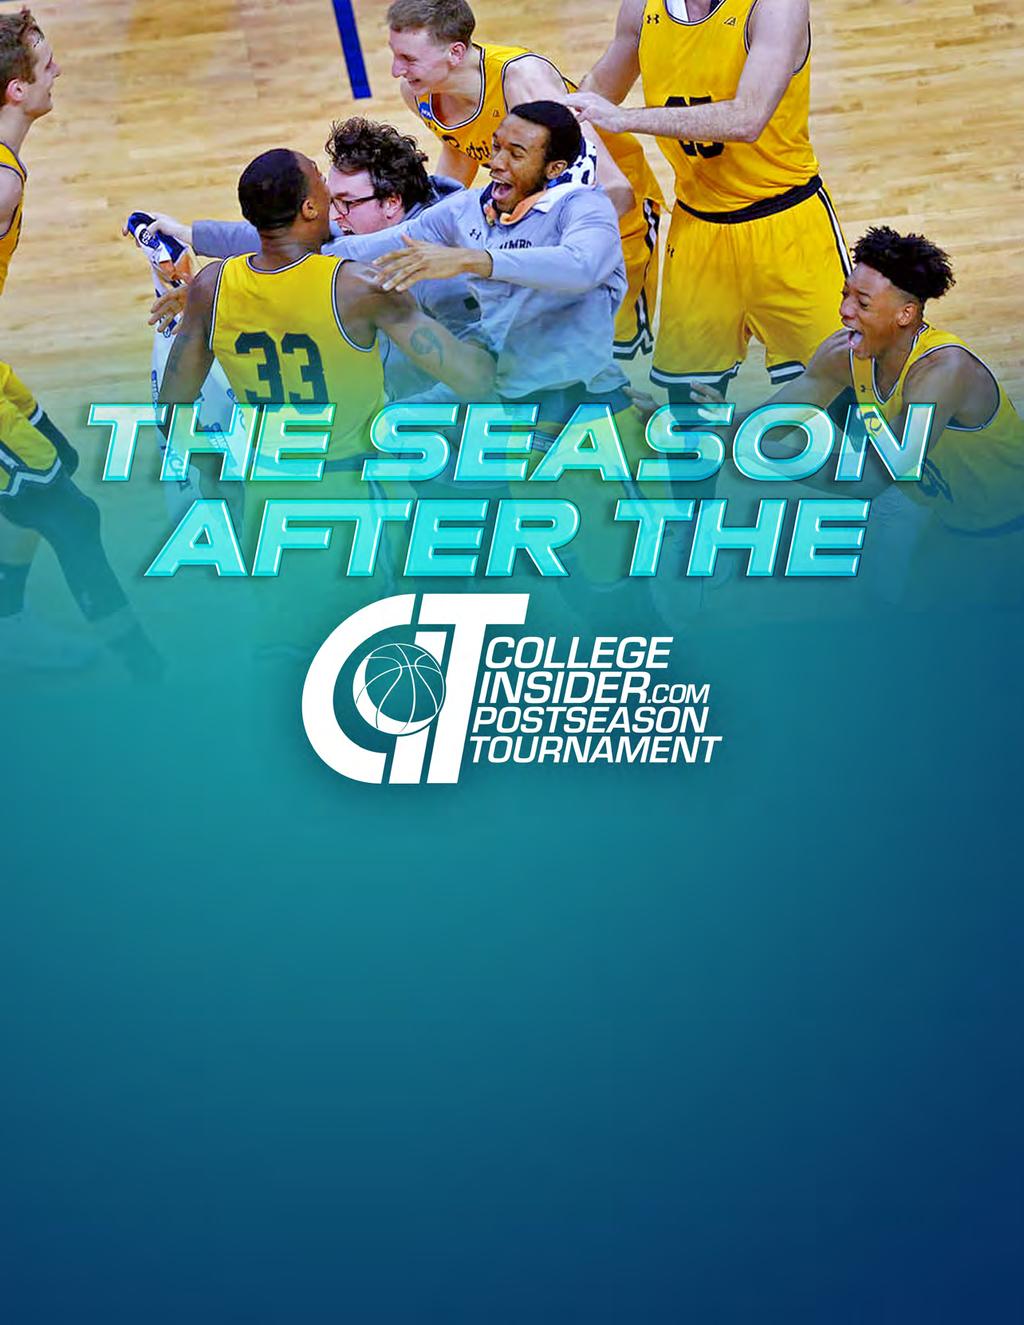 Many programs have benefited from playing in the CollegeInsider.